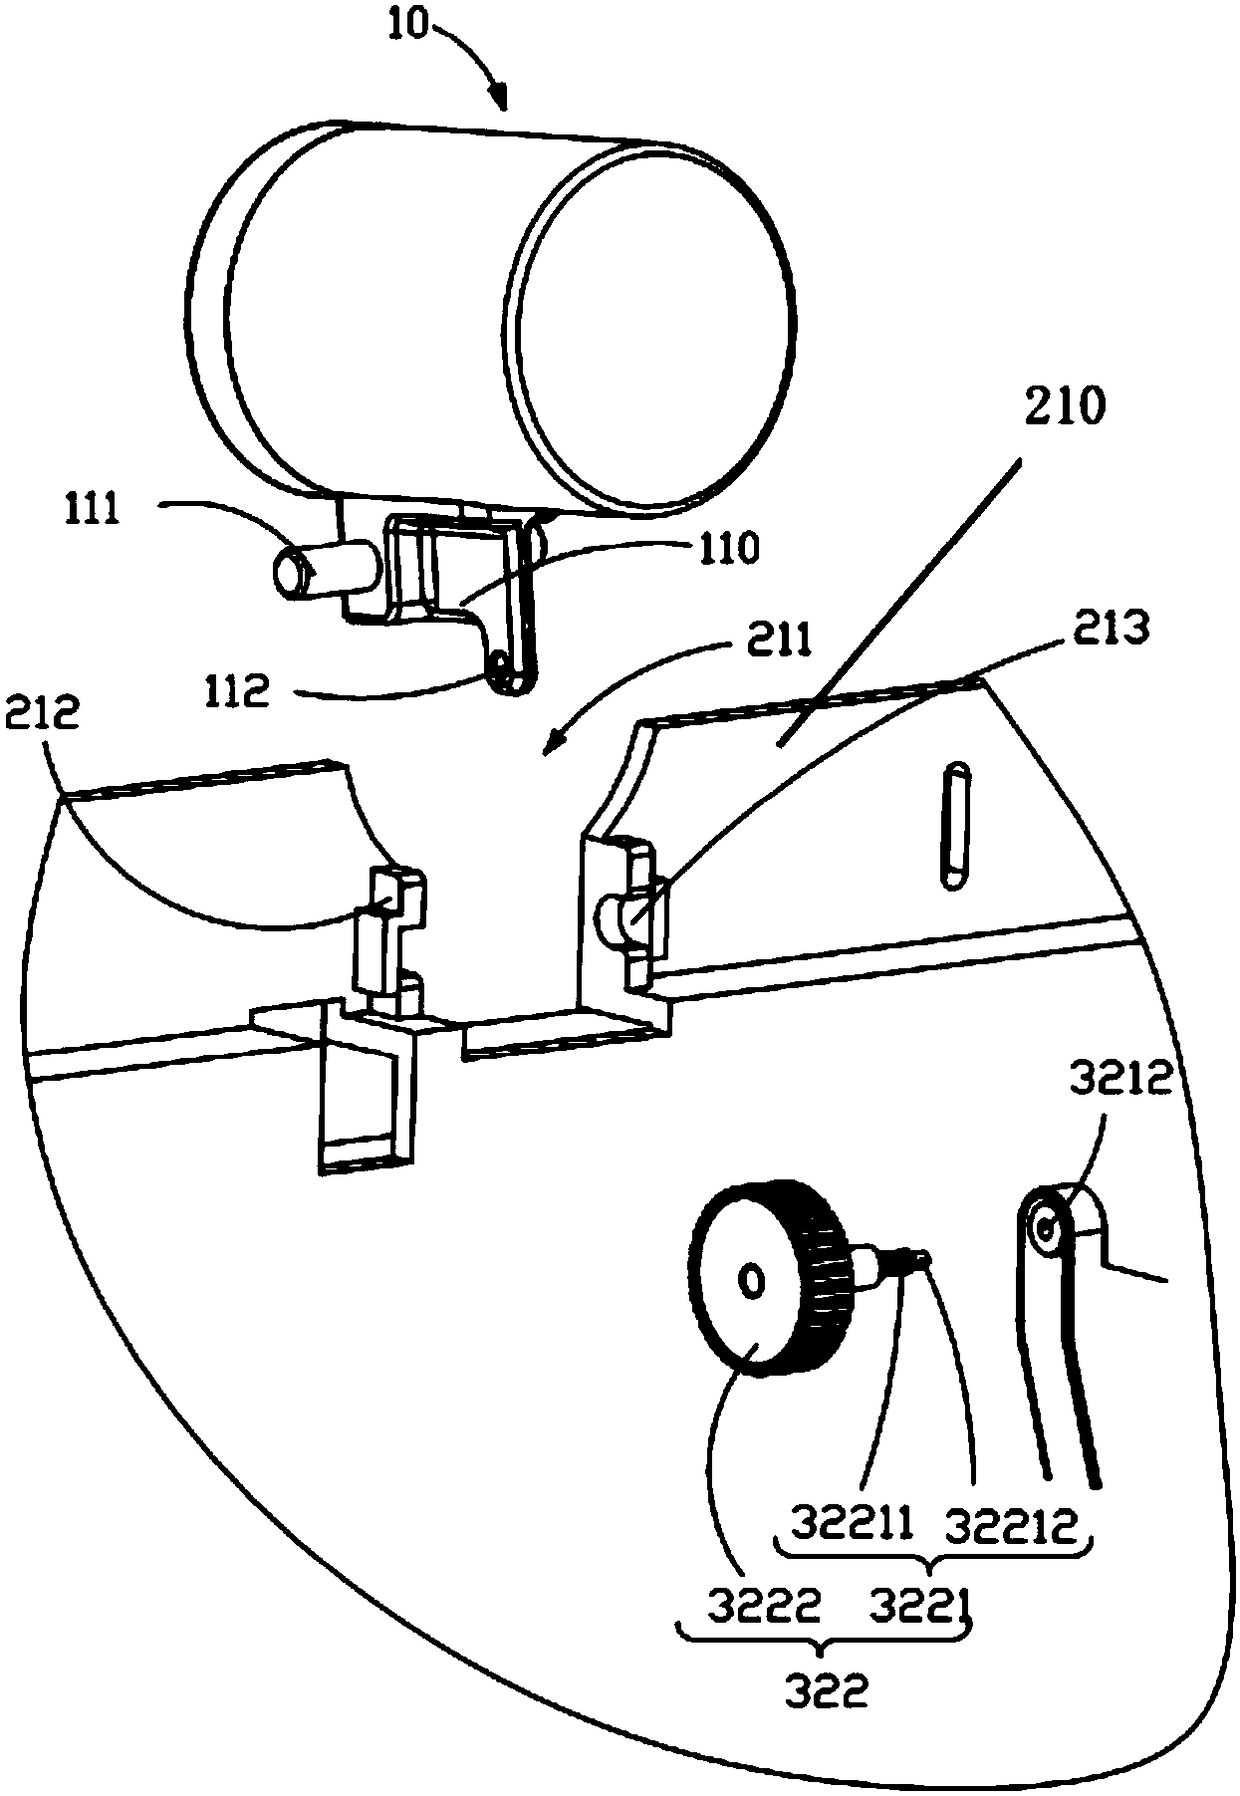 Electronic device with cameras